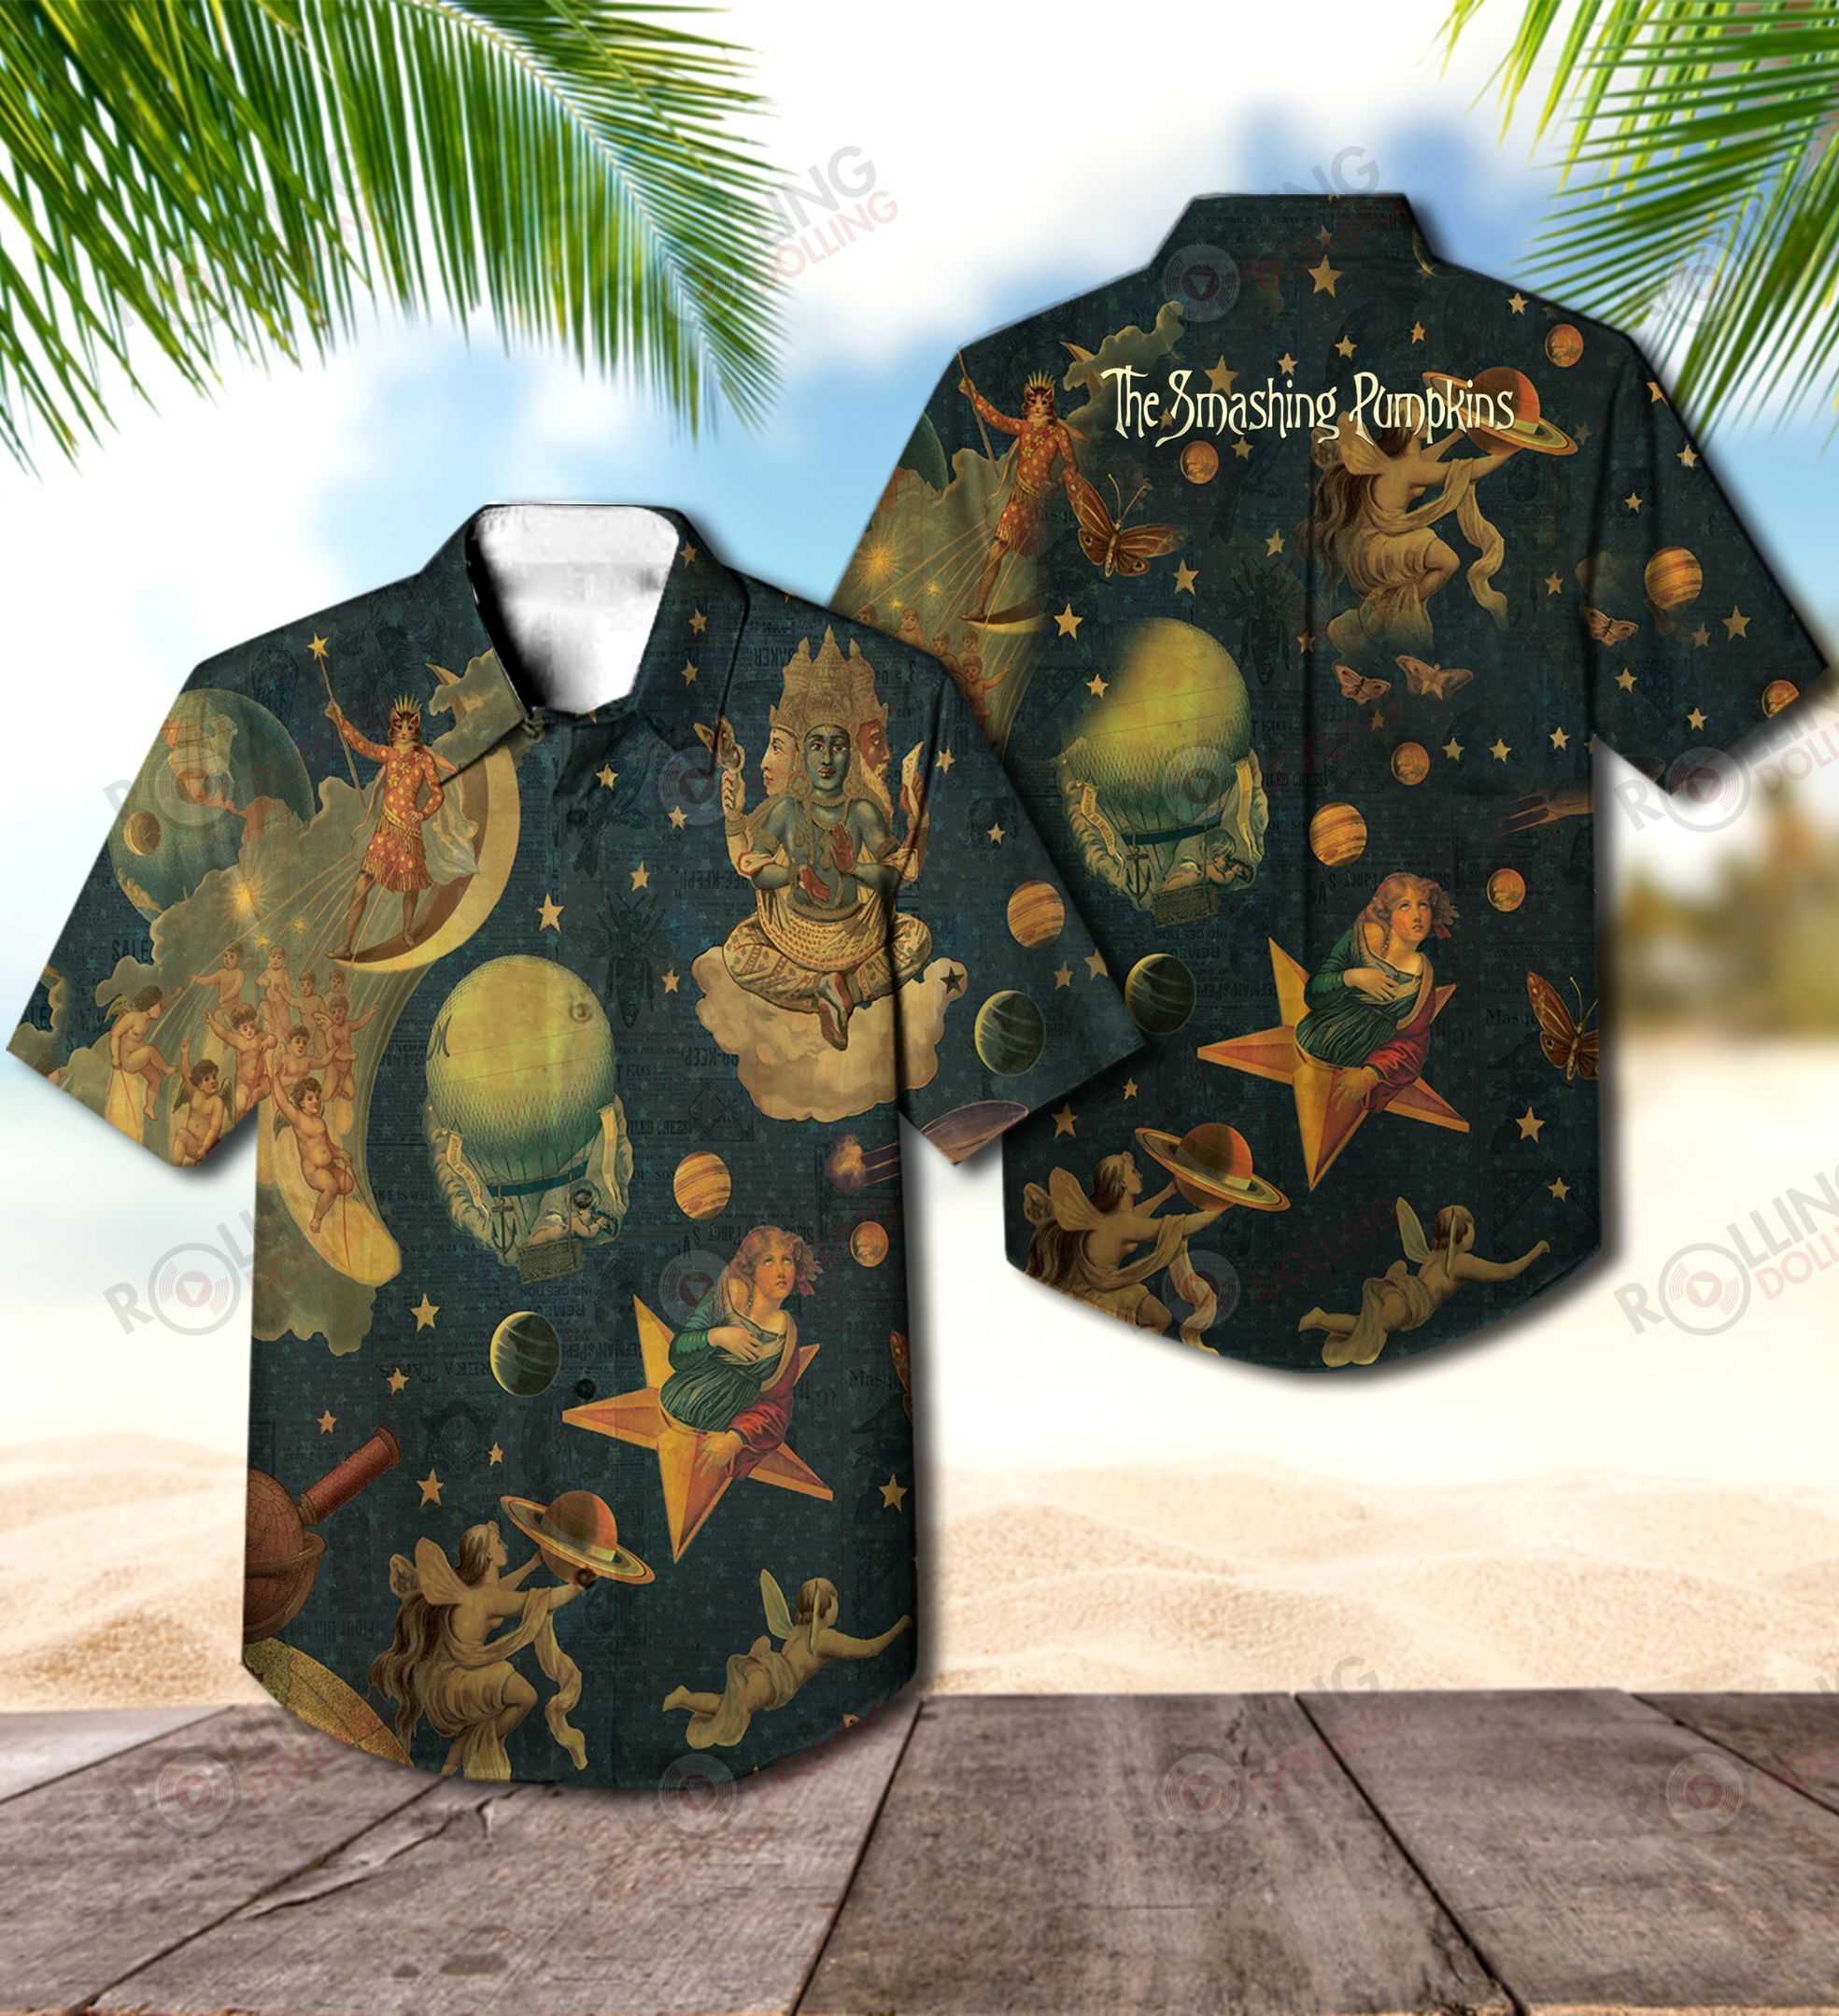 This would make a great gift for any fan who loves Hawaiian Shirt as well as Rock band 122